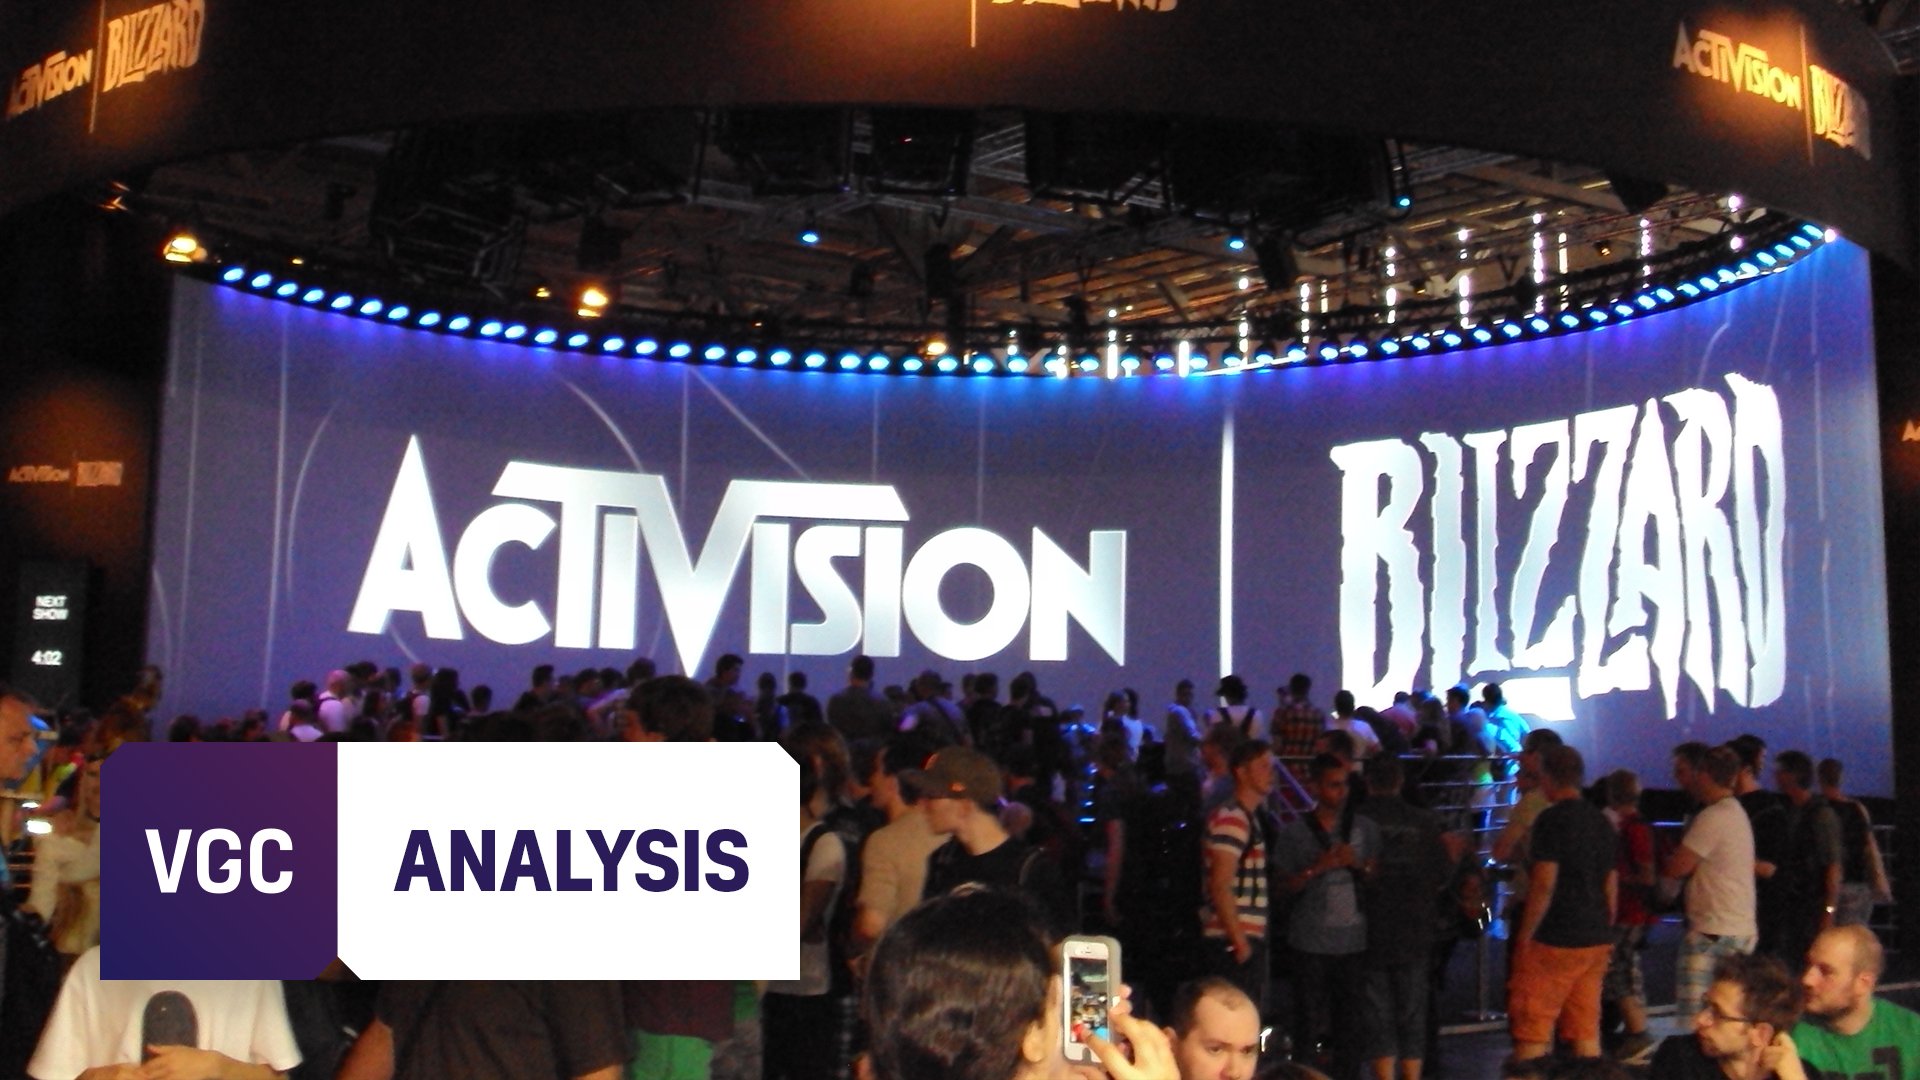 Activision Blizzard partners with Google Cloud and